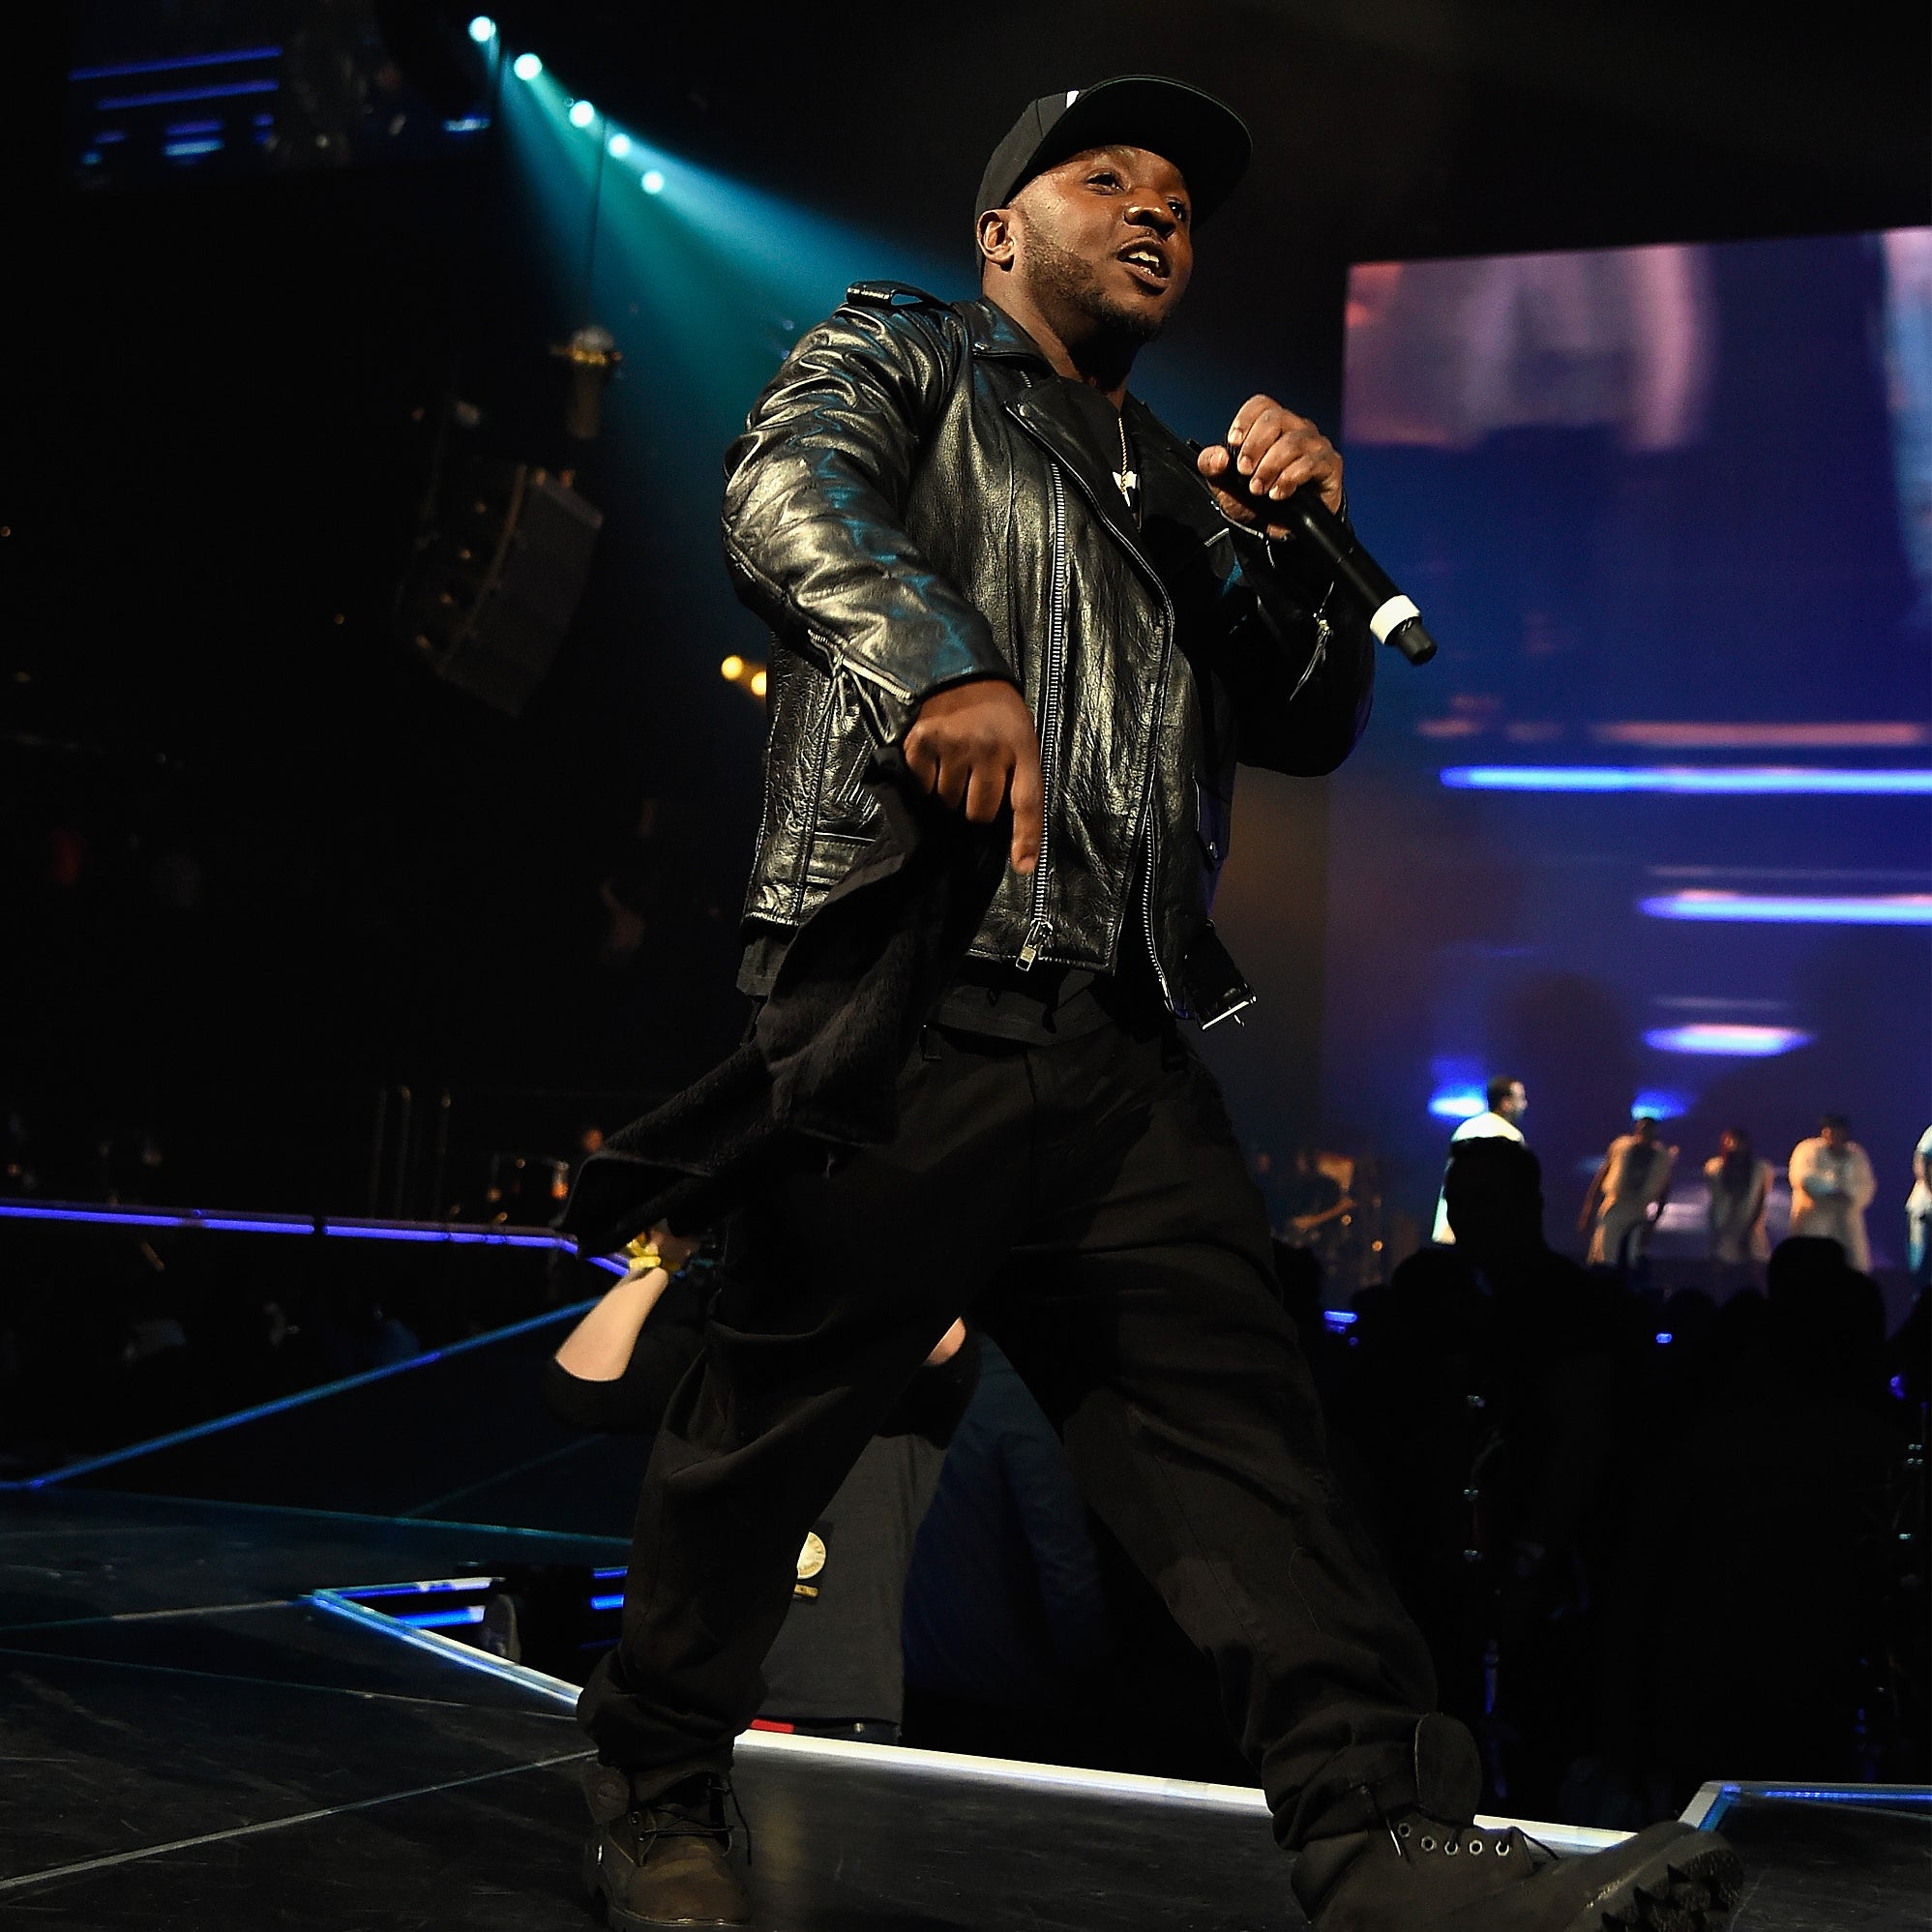 35+ Epic Photos From the Bad Boy Reunion Concert in Honor of Biggie's Birthday
